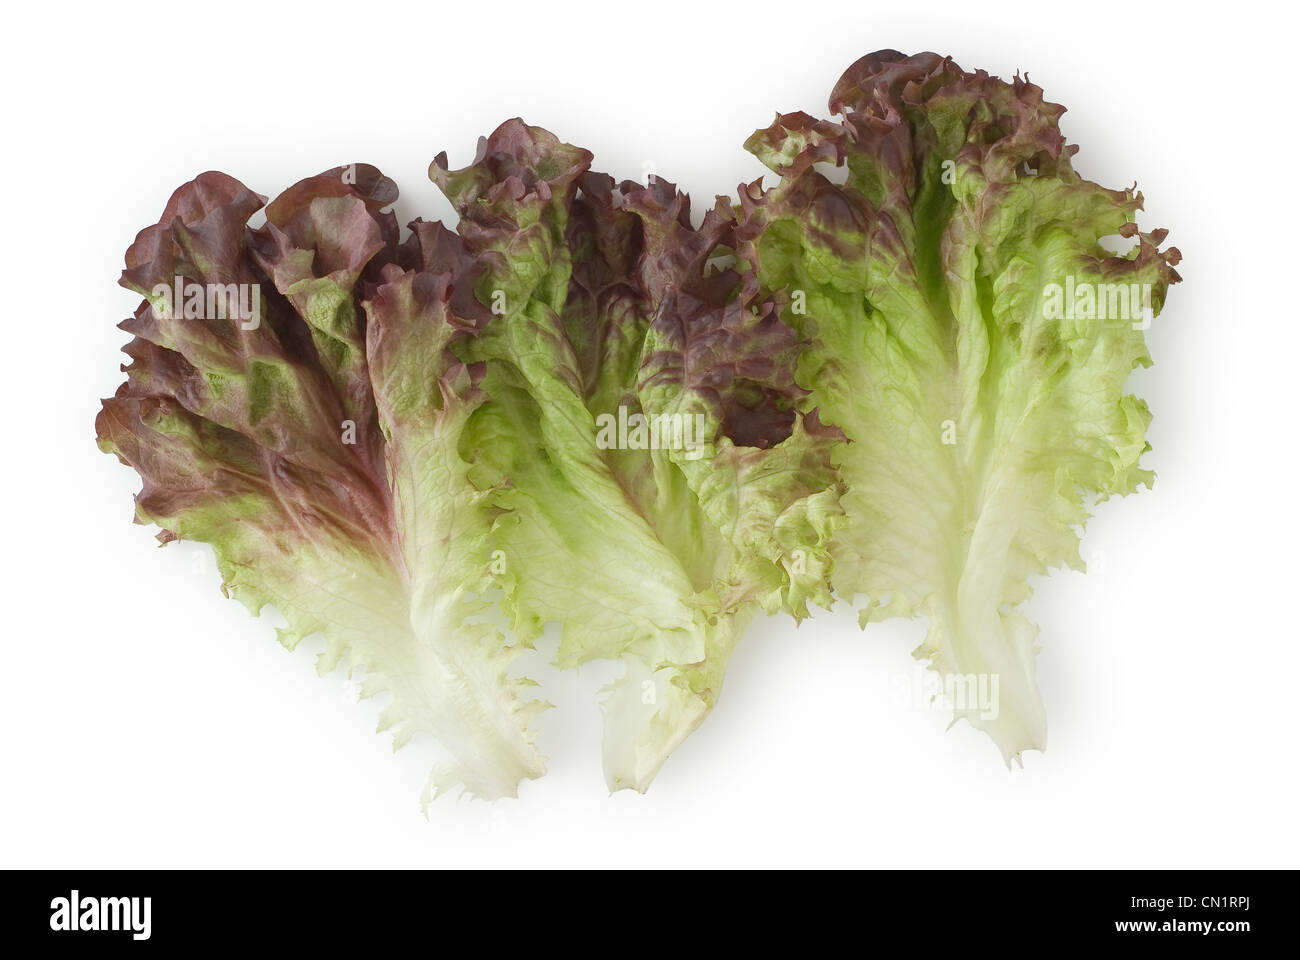 Red Leaf Lettuce as a Healthy and Nutritious Vegetable Stock Photo